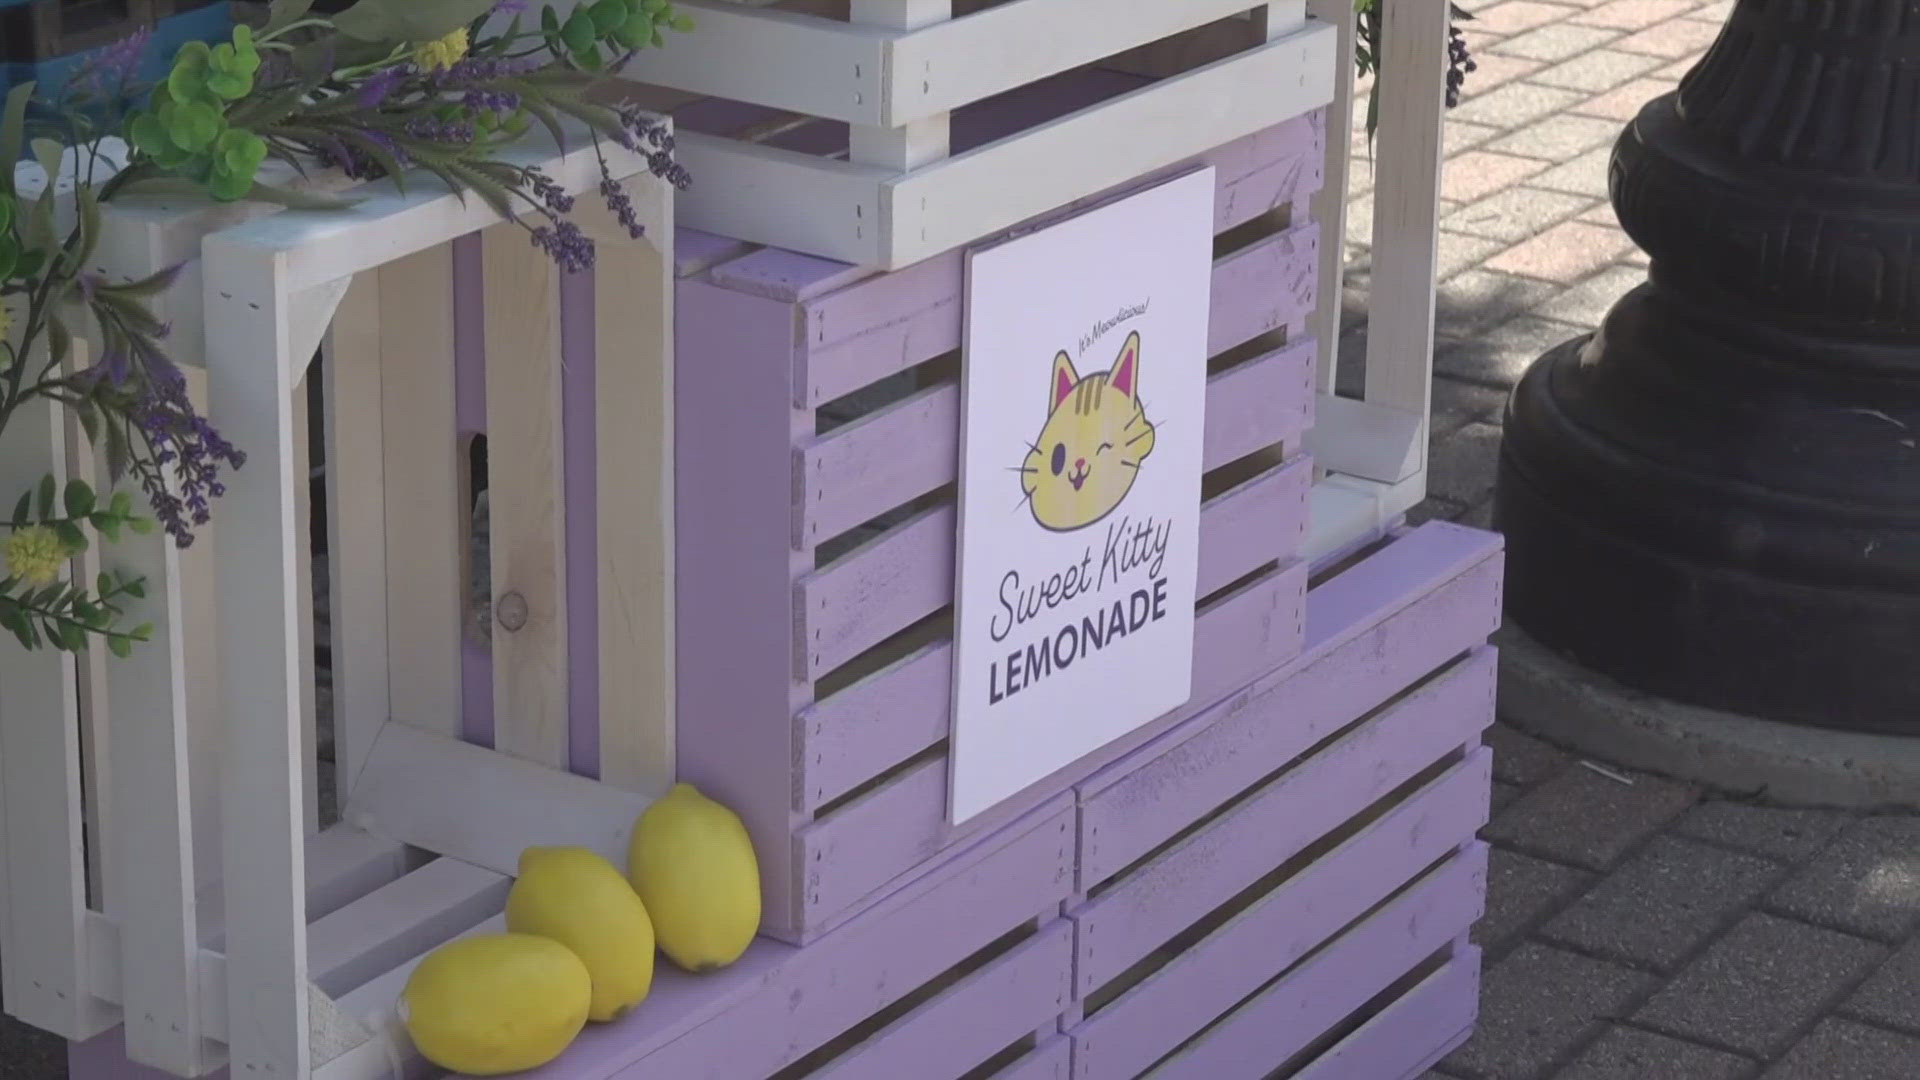 50% of the profits from eight-year-old Harlee Alvarez's lemonade stand are going to a local nonprofit that specializes in neutering and spaying cats.